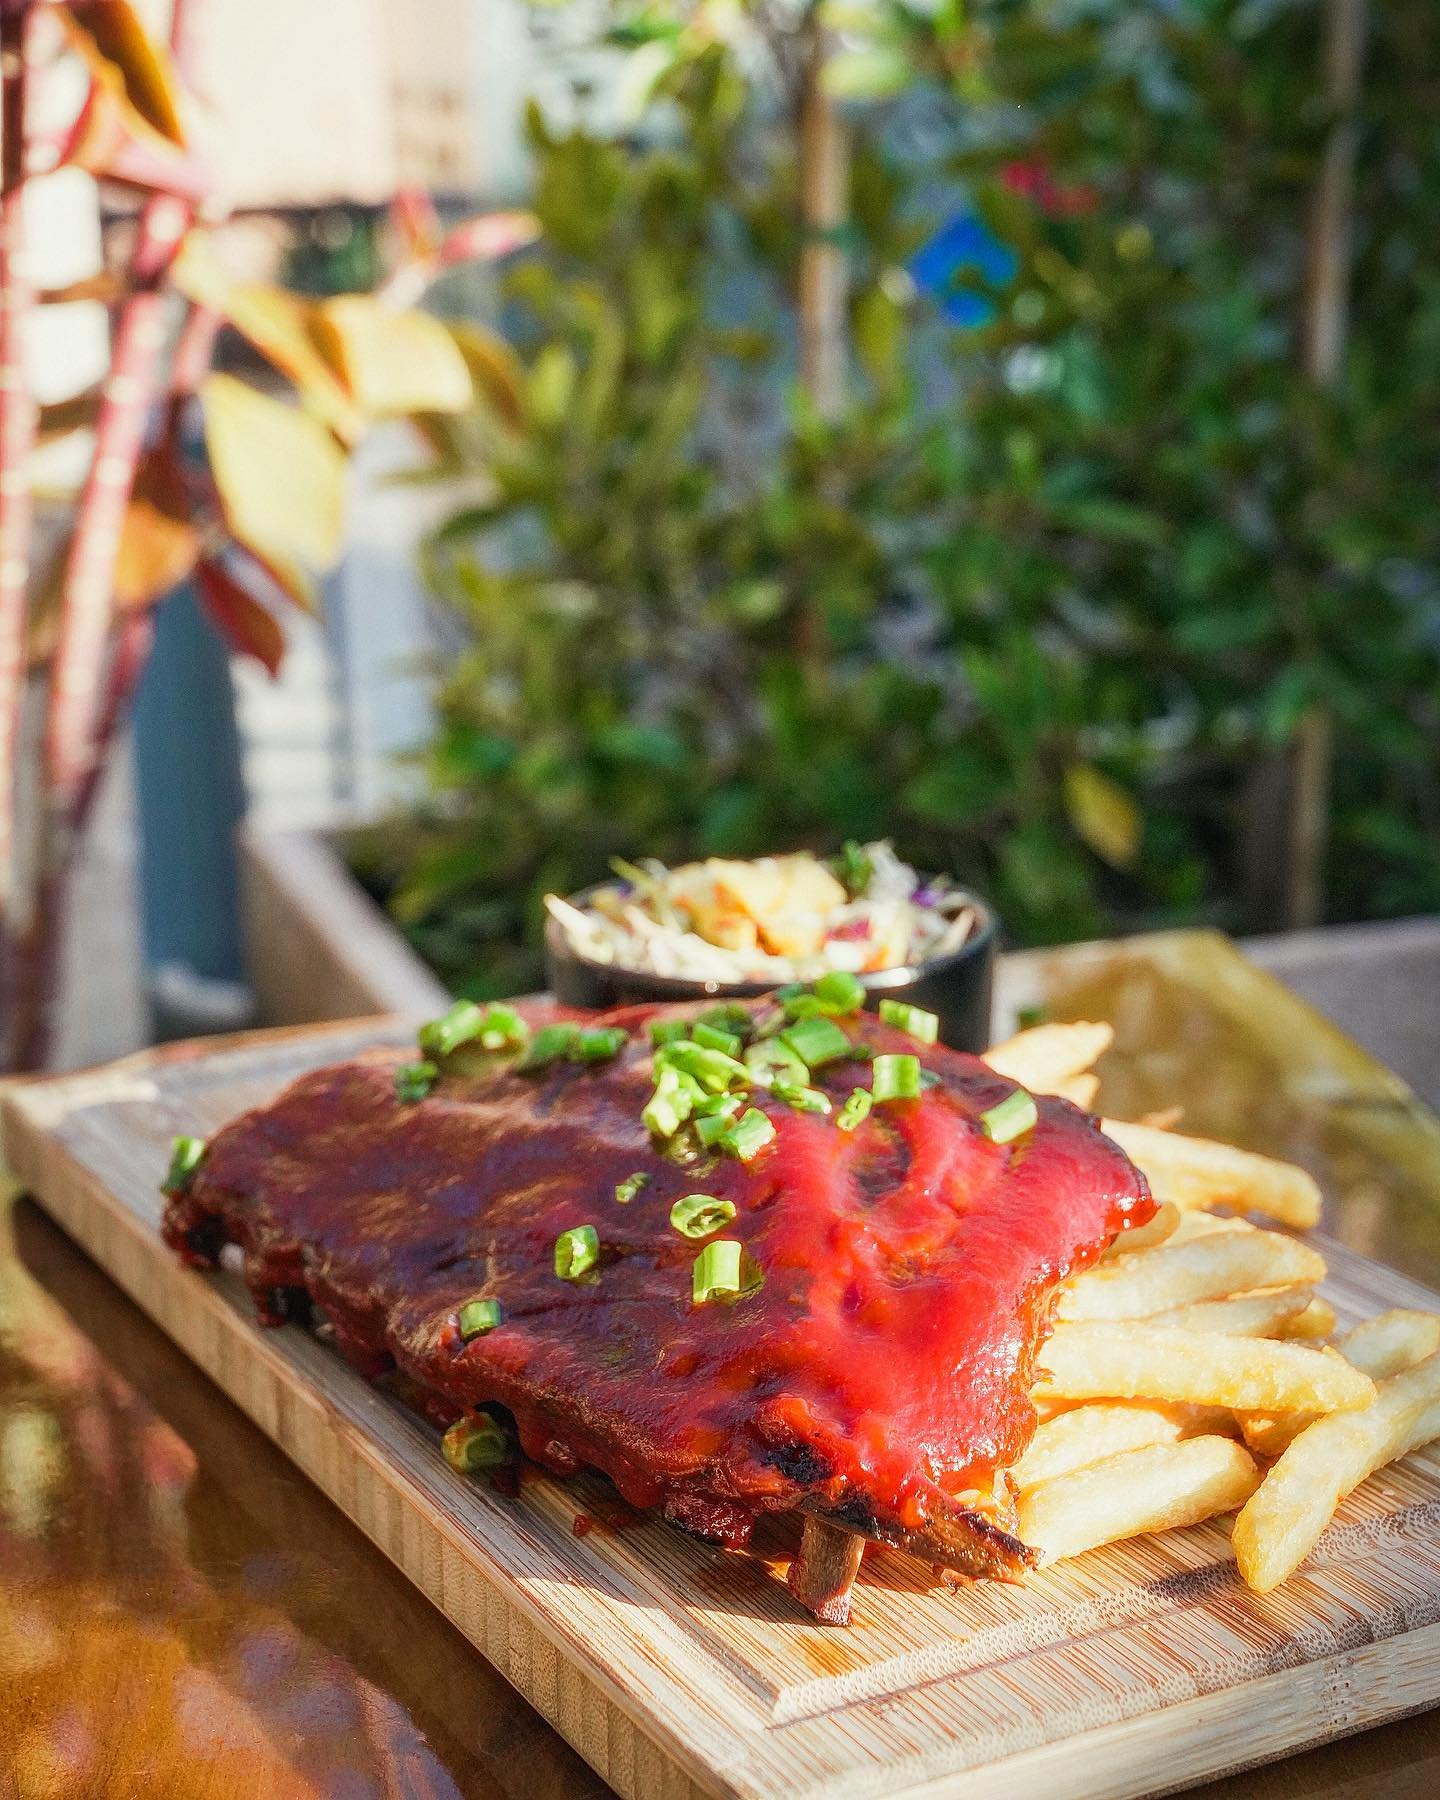 Final weekend to come by and indulge in our April specials before they&rsquo;re gone! 😋

🍽️ Grilled Pork BBQ Ribs
🍸 The Presley&rsquo;s Paper Plane
🍰 Mud Pie